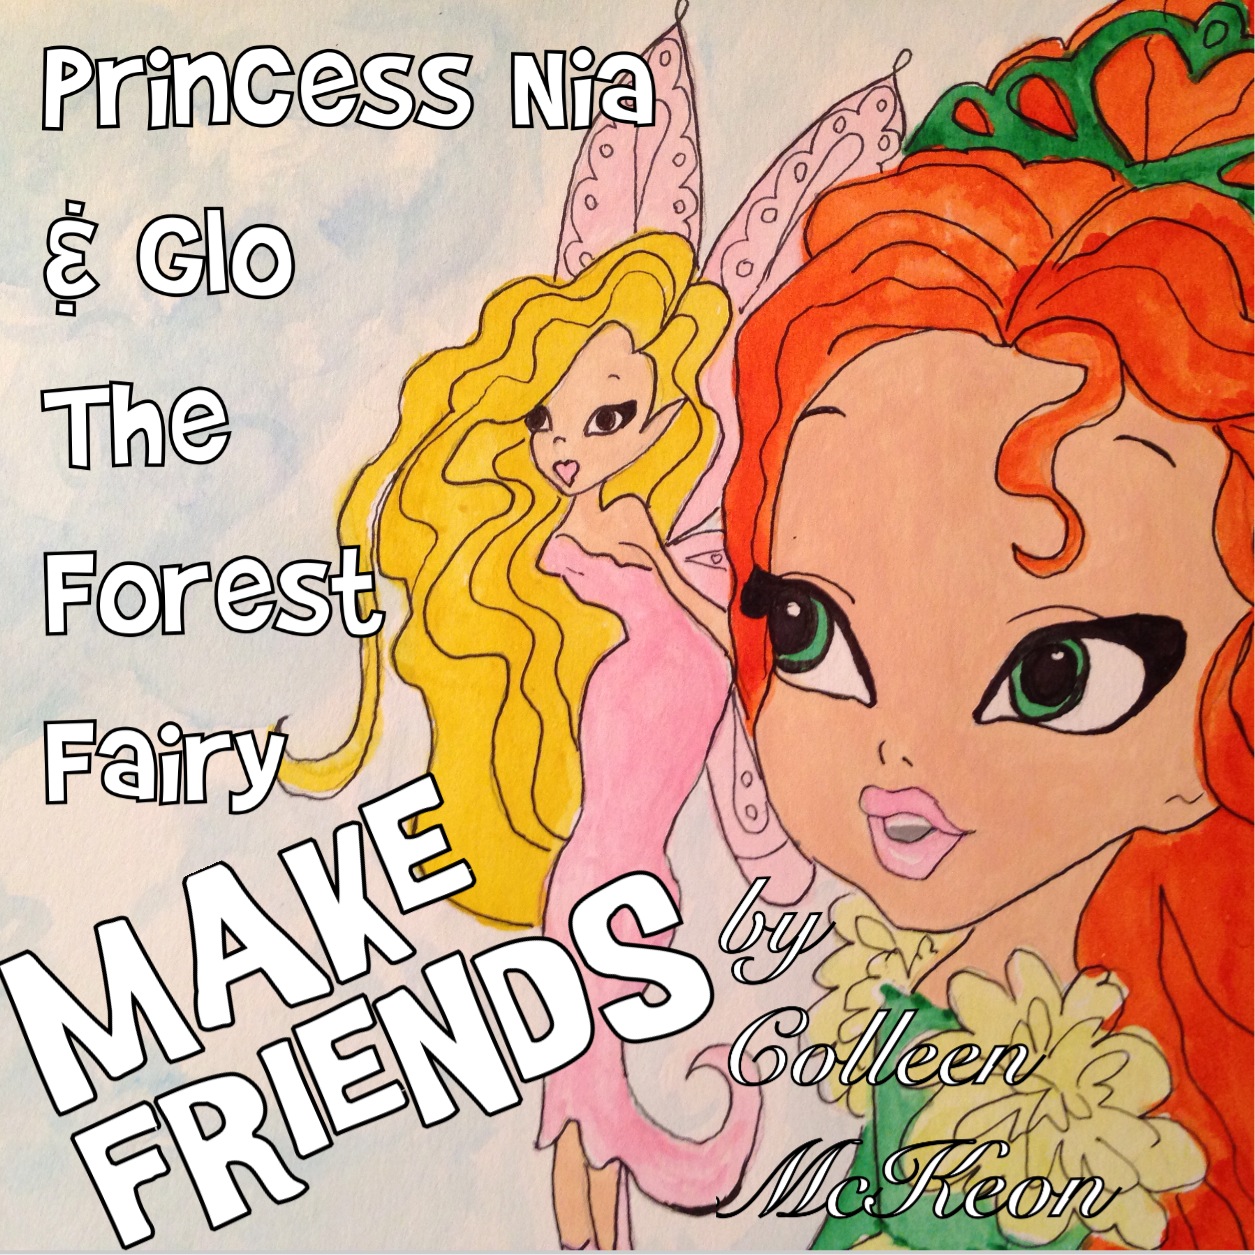 "PRINCESS NIA AND GLO THE FOREST FAIRY MAKE FRIENDS"